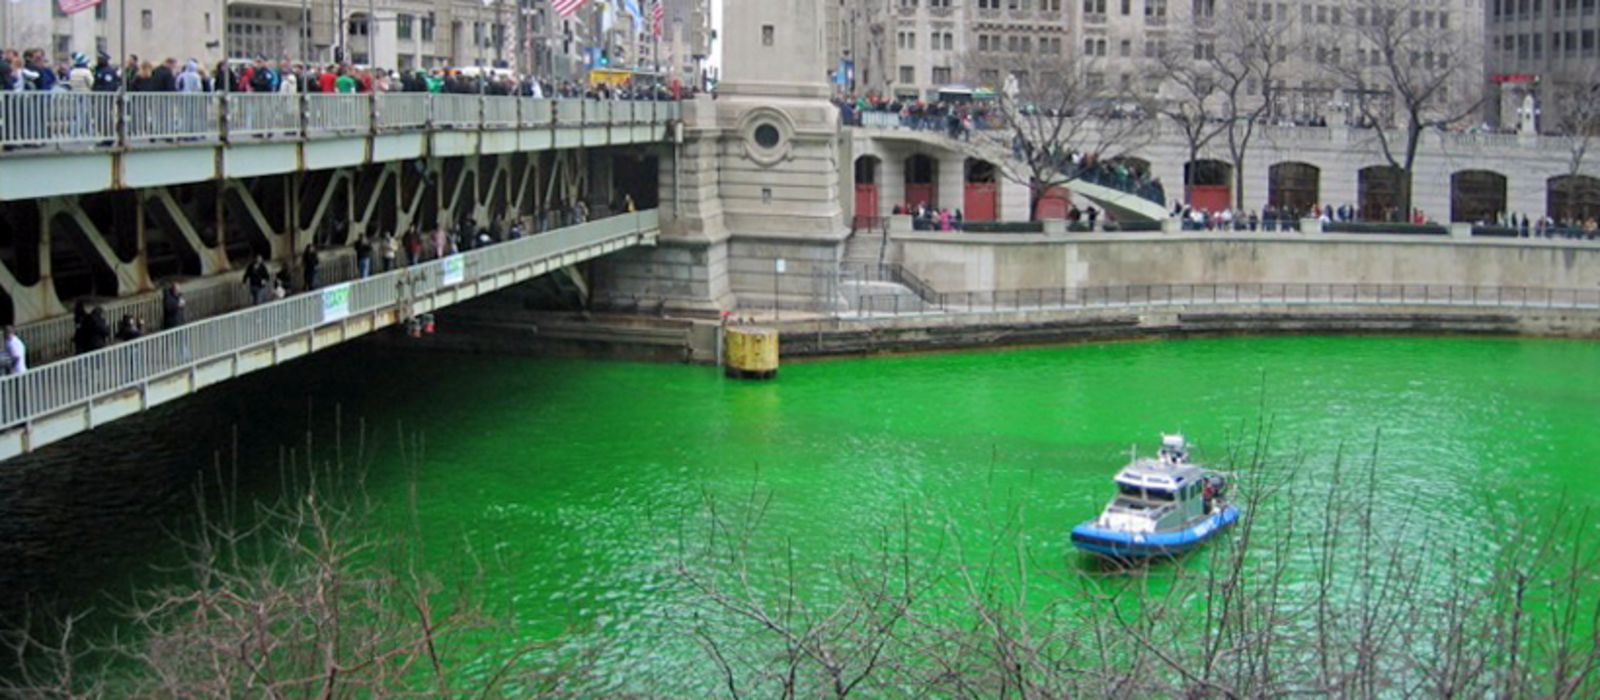 St. Patrick's Day in Chicago